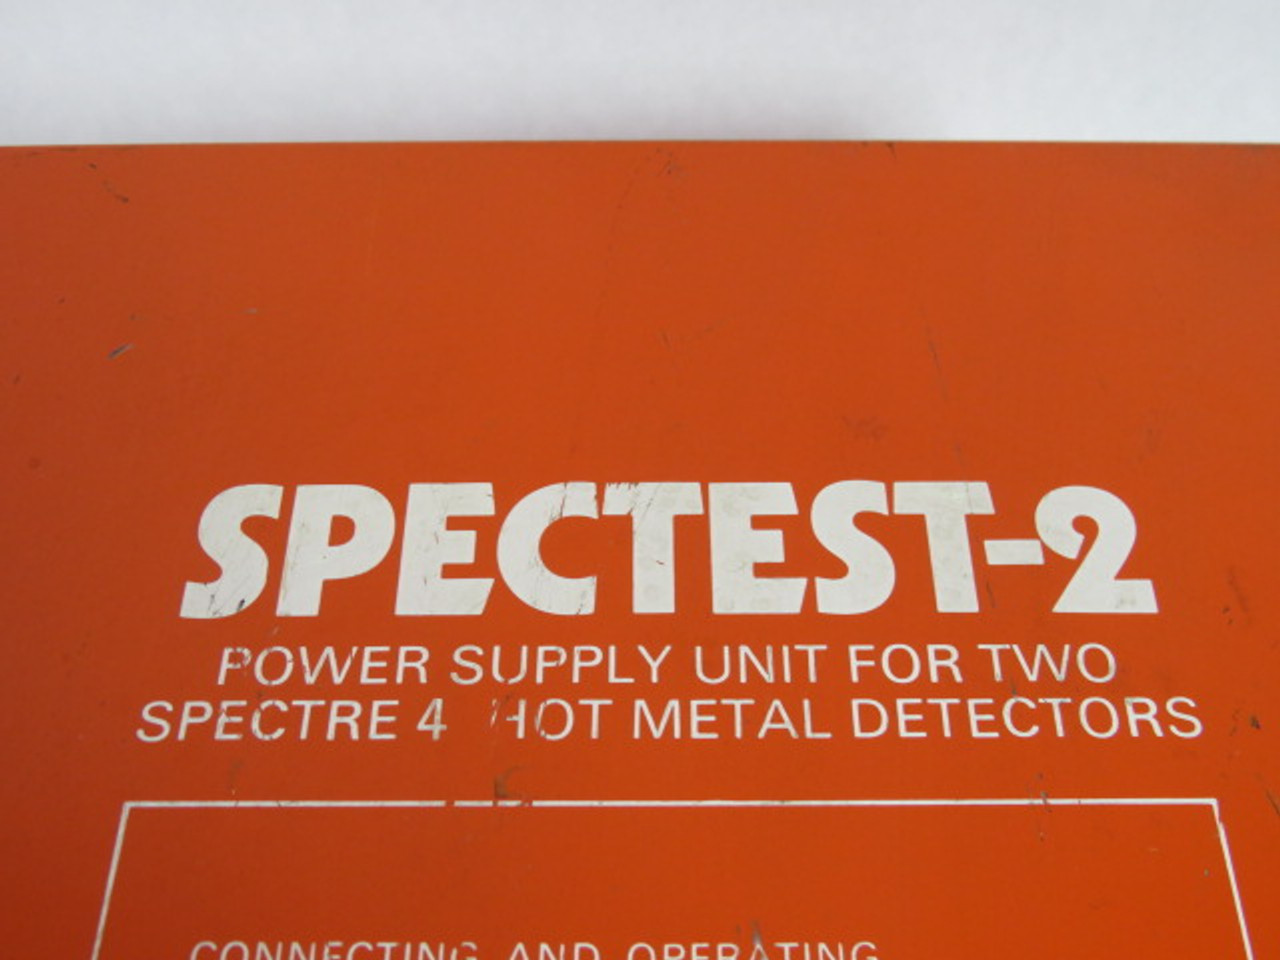 Davy McKee SPECTEST-2 Power Supply For Two Spectre 4 Hot Metal Detectors USED